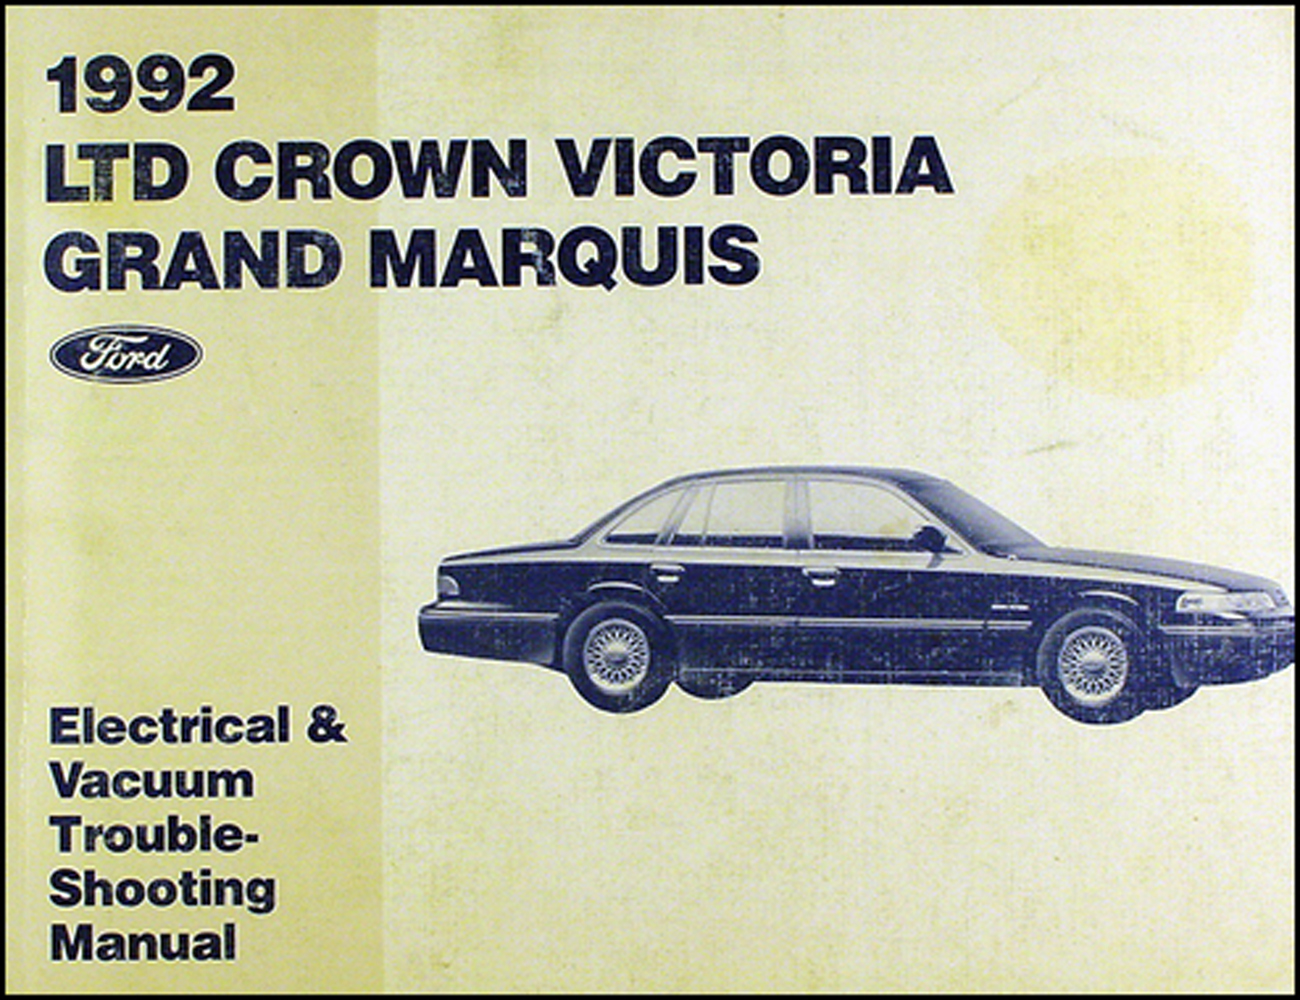 1992 Ford Crown Victoria Mercury Grand Marquis Electrical Troubleshooting Manual